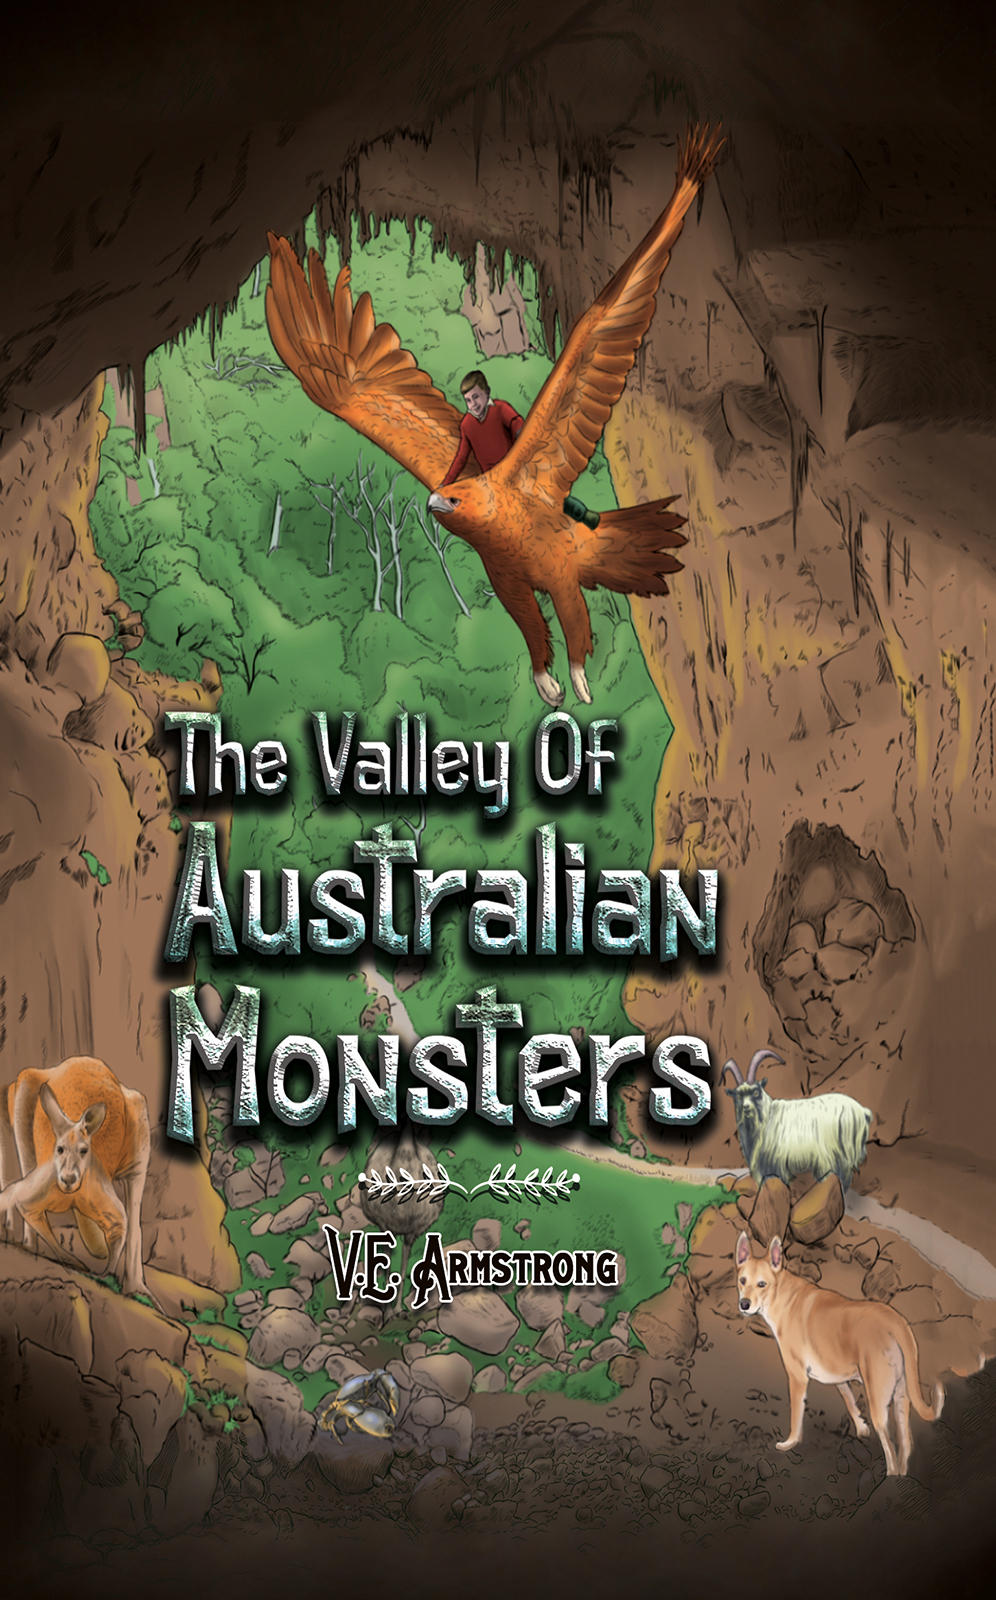 This image is the cover for the book The Valley of Australian Monsters